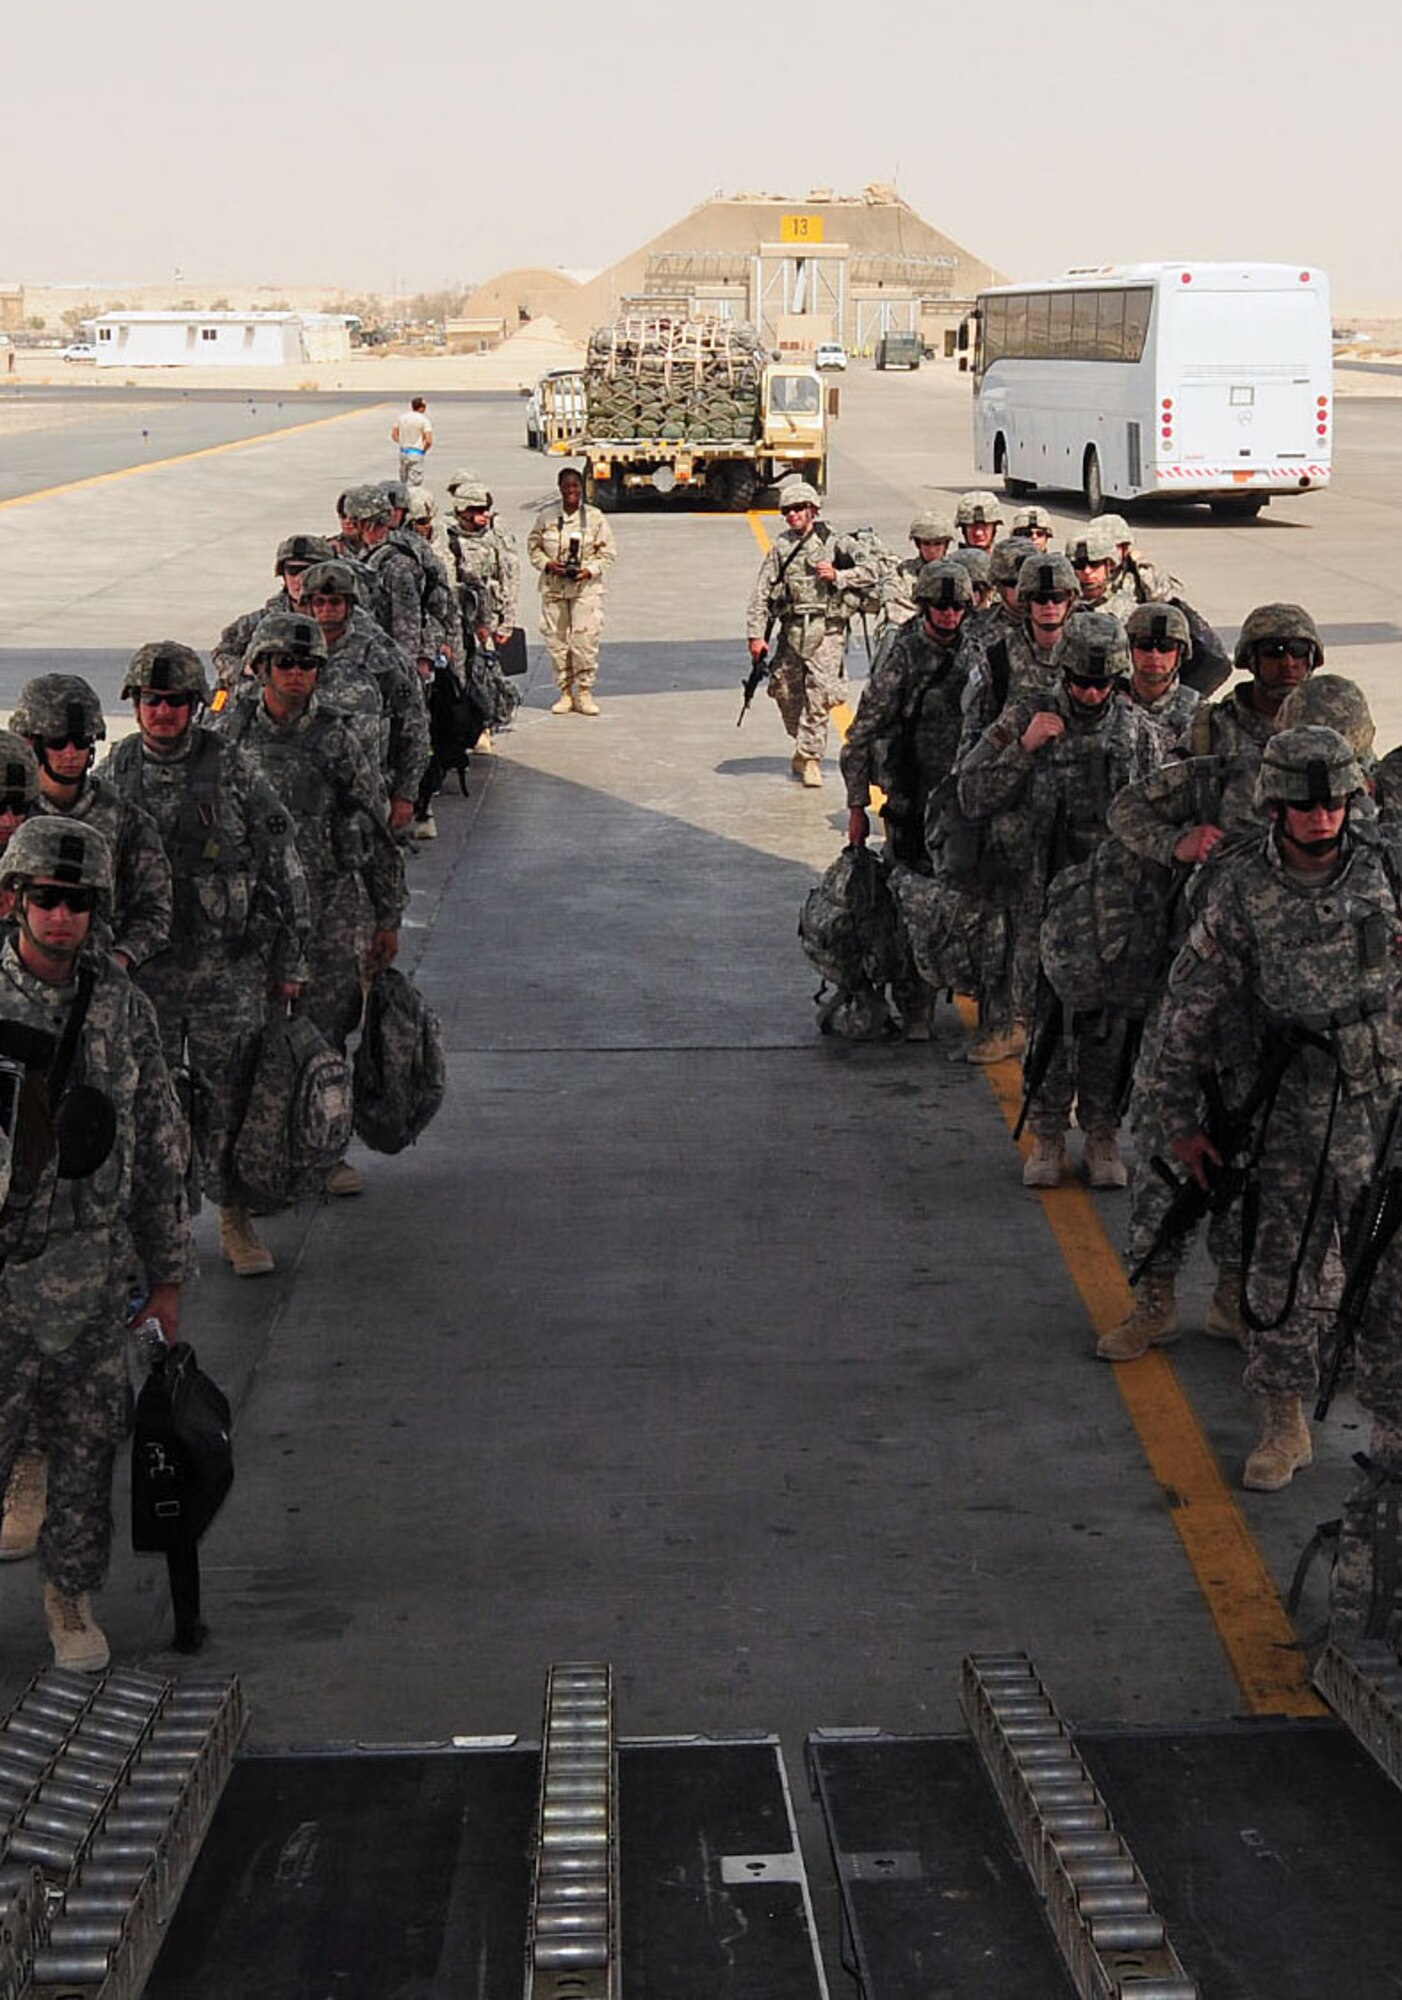 SOUTHWEST ASIA -- U.S. Army personnel from the 3rd Army/Army Central Command prepare to board a 816th Expeditionary Airlift Squadron C-17 Globemaster III on the 386th Air Expeditionary Wing parking ramp at an undisclosed location in Southwest Asia Aug. 21, 2009.  The C-17 is deployed from McChord Air Force Base, Wash.  (U.S. Air Force photo / Tech Sgt. Tony Tolley)